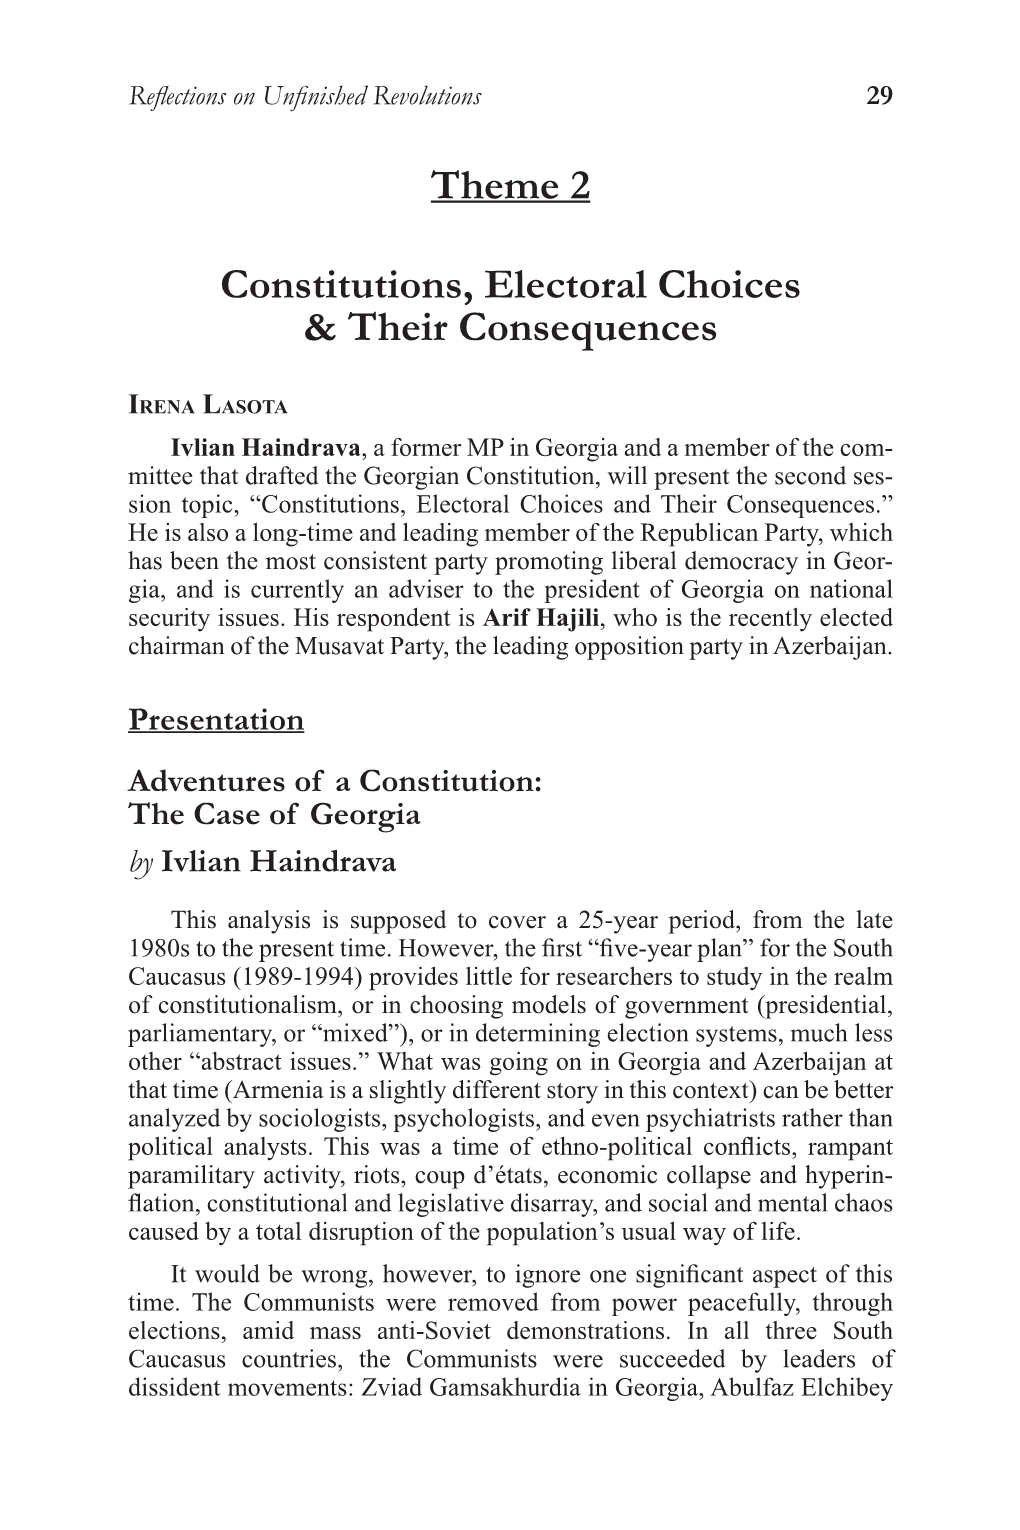 Theme 2 Constitutions, Electoral Choices & Their Consequences